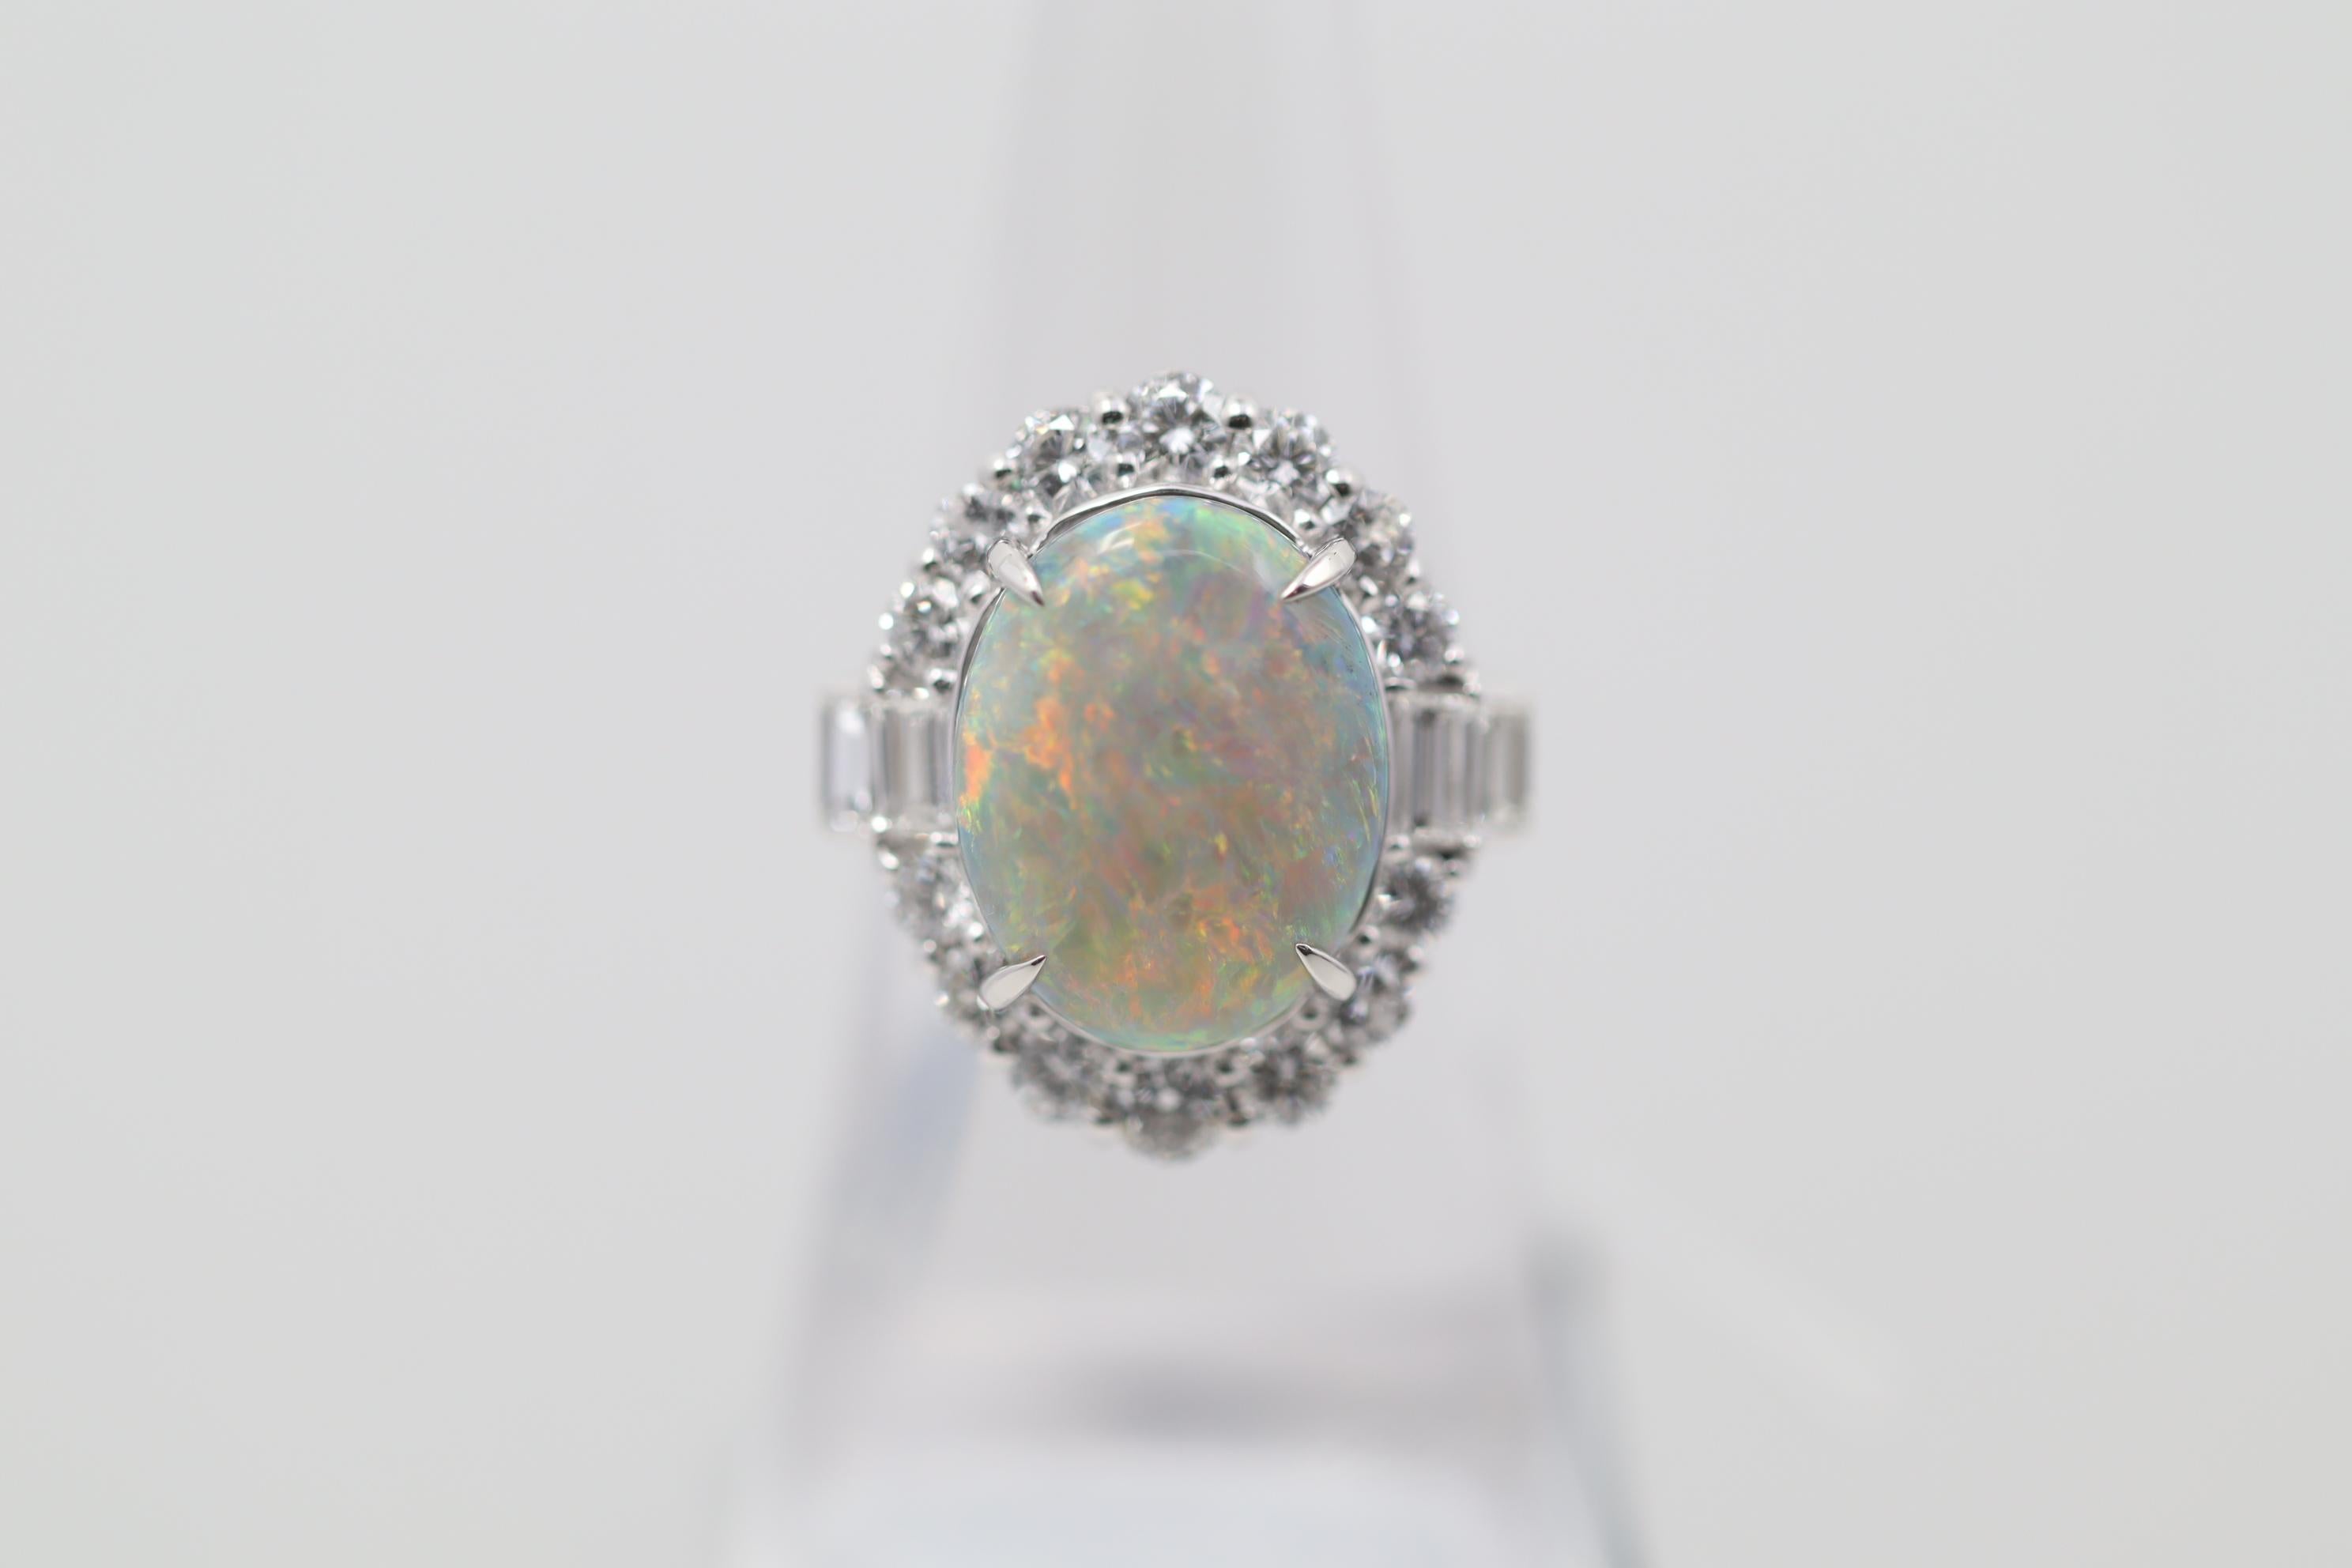 An exceptional natural black opal from the famed mining area of Lightning Ridge, Australia. The opal weighs a substantial 7.38 carats and has excellent play-of-color. Across the entire opal are bright and strong flashes of primarily red with accents